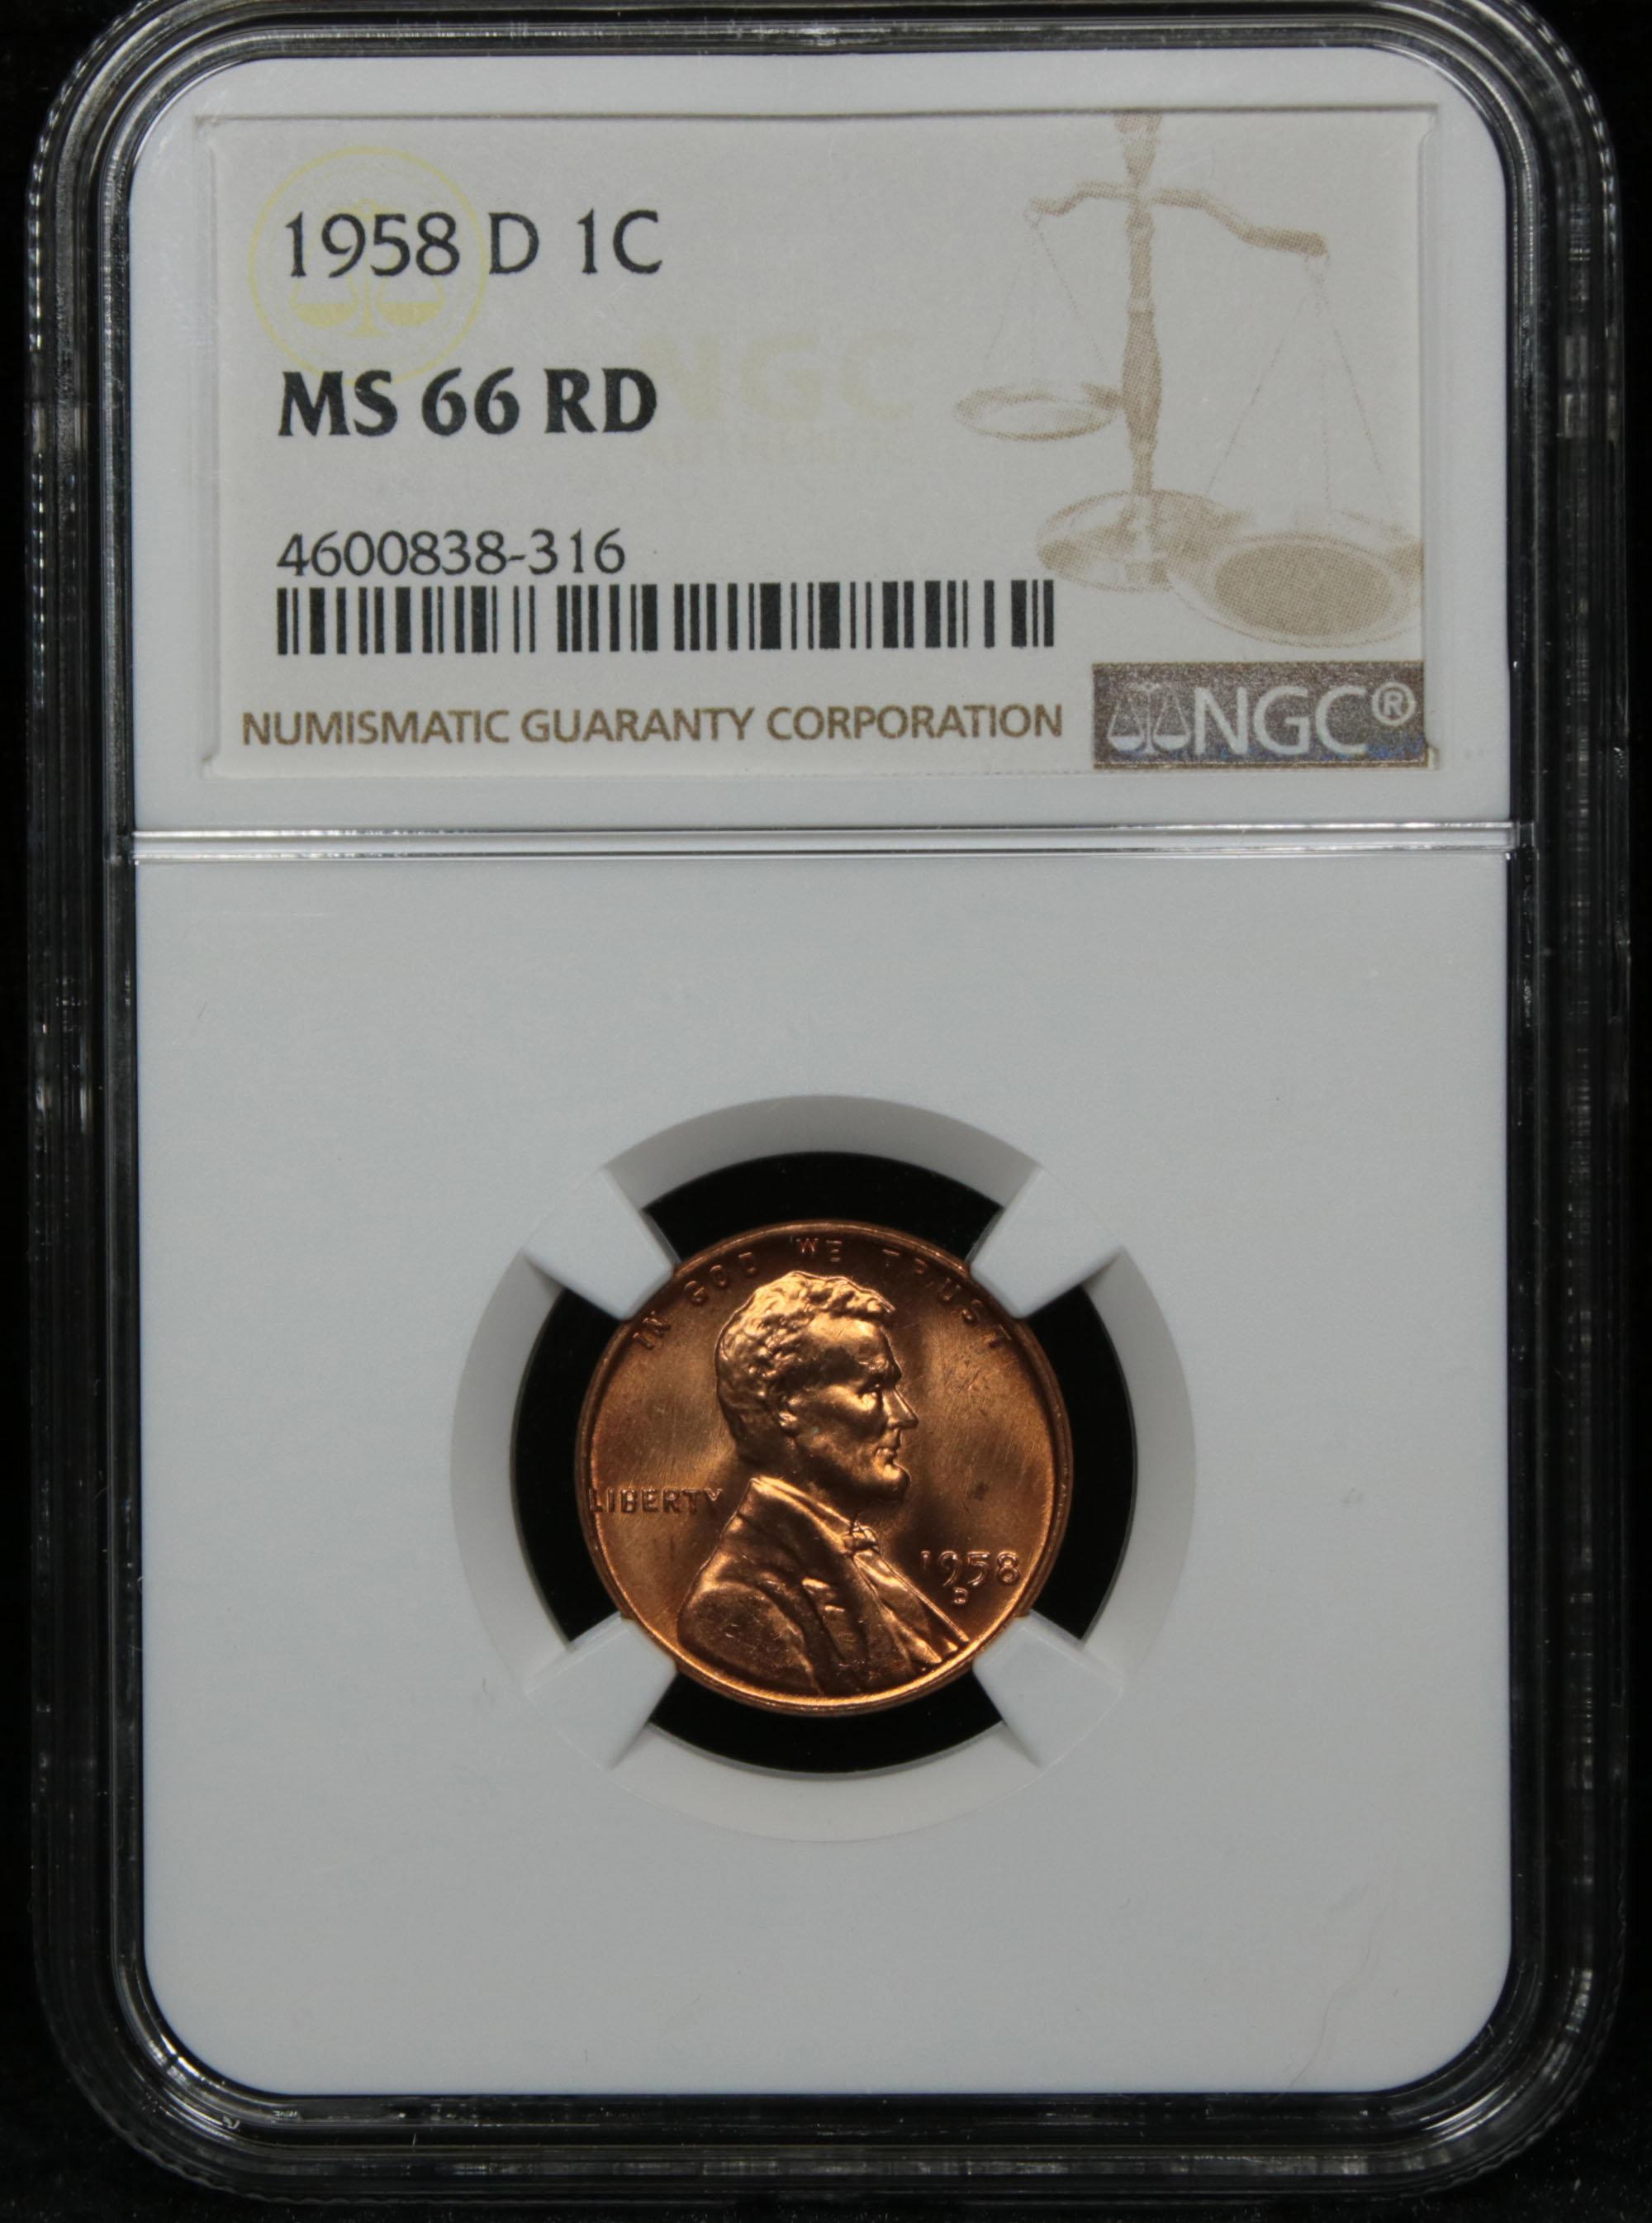 NGC 1958-d Lincoln Cent 1c Graded ms66 RD By NGC